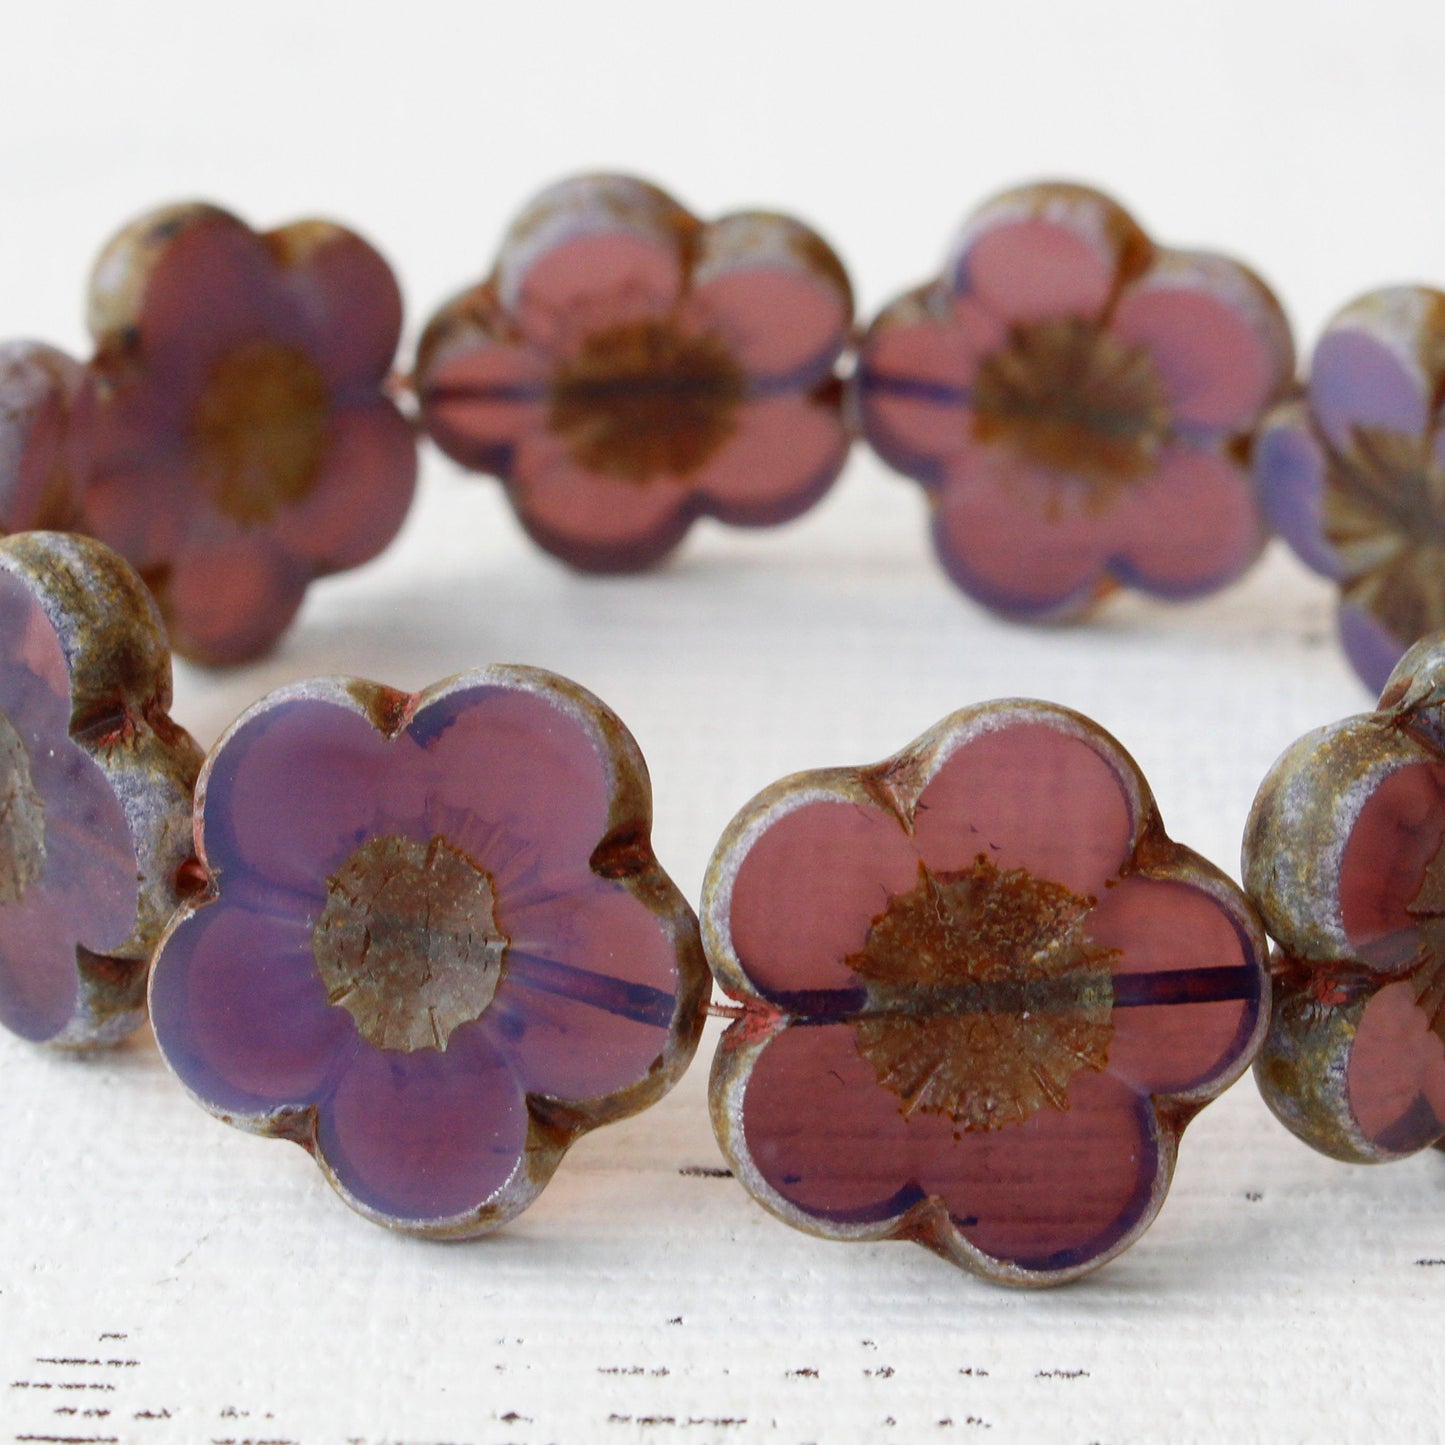 Load image into Gallery viewer, 21mm Hibiscus Flower Beads - Opaline Plum Purple - 10 Beads
